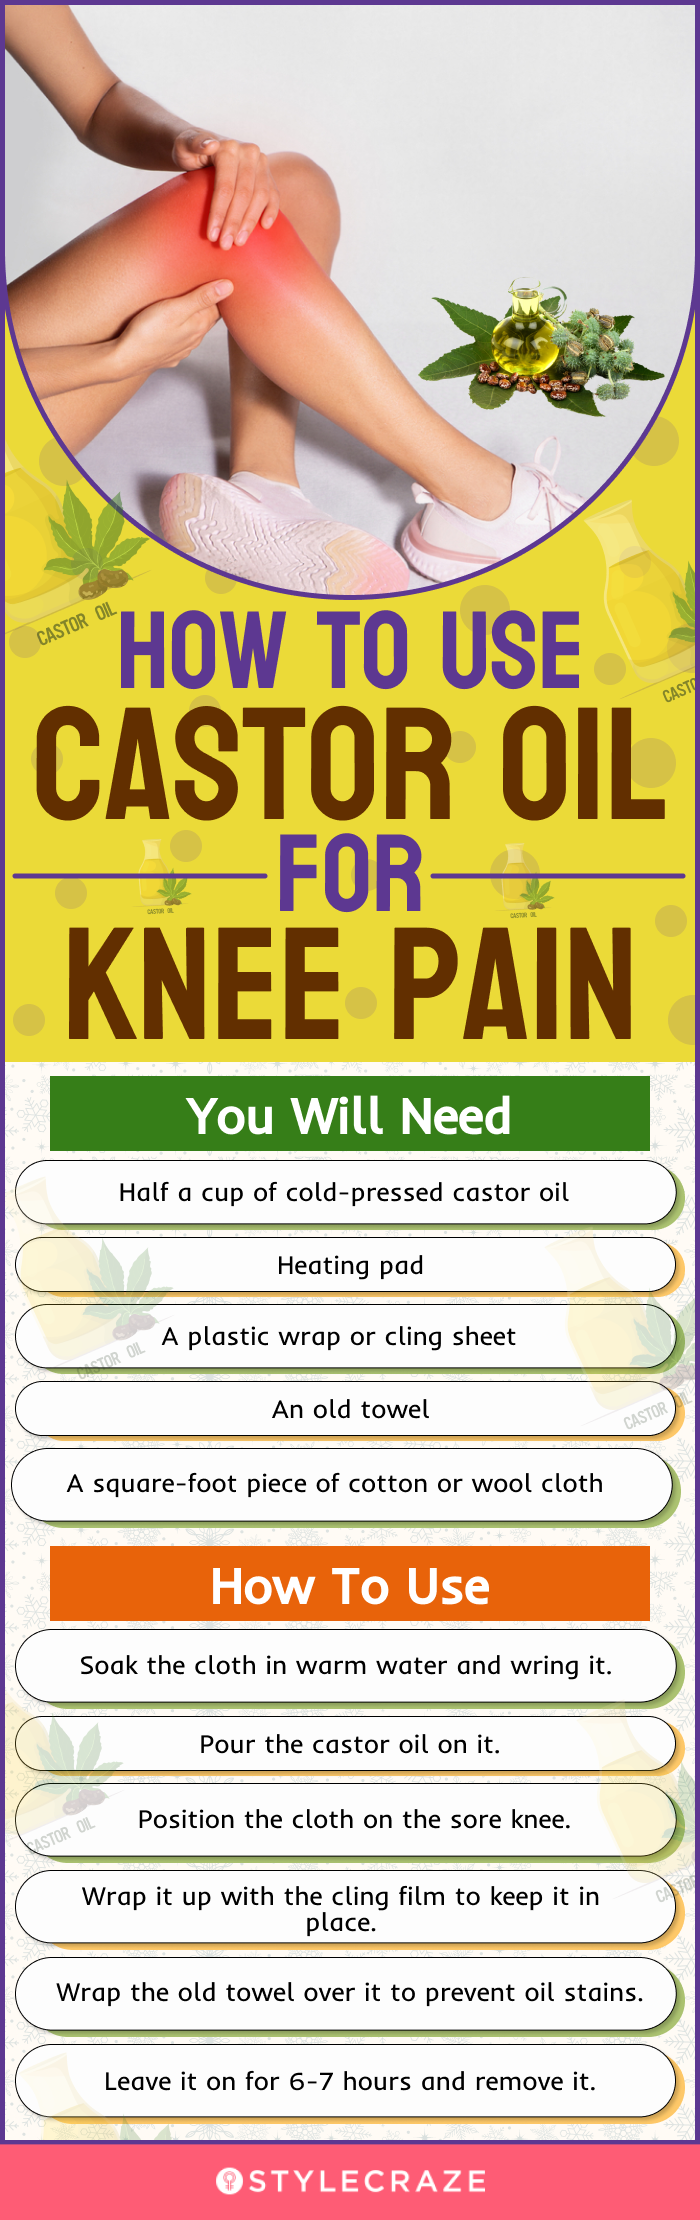 how to use castor oil for knee pain (infographic)